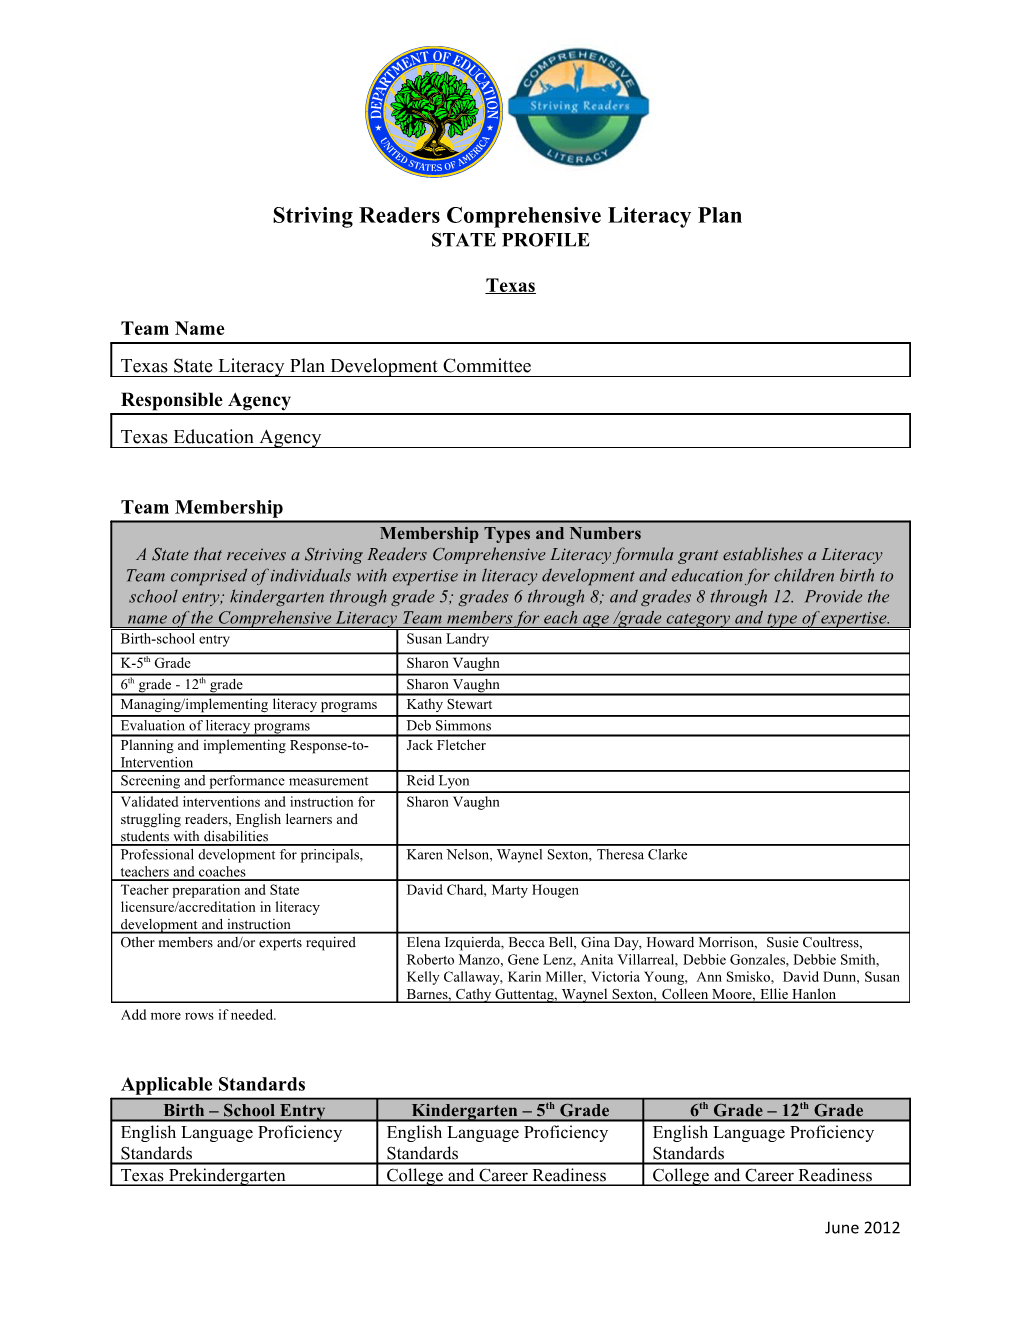 Texas State Striving Readers Comprehensive Literacy Plan (MS Word)